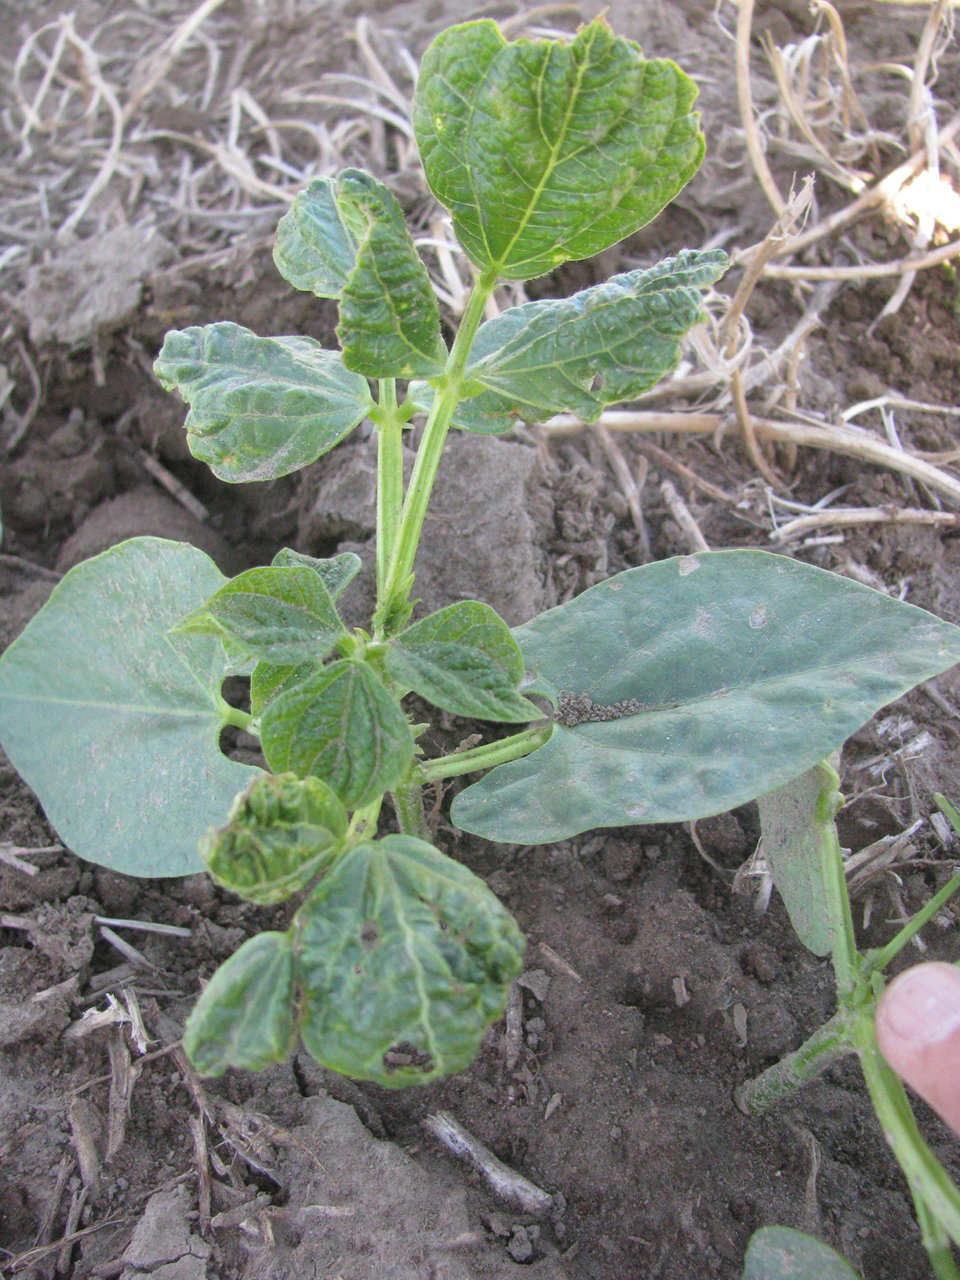 Severe injury to a pinto bean crop from Outlook, an acetanilide herbicide. Notice the unifoliate leaves typically are asymptomatic, whereas the trifoliate leaves have a puckered, drawstring appearance. Injury from Outlook can be affected by soil texture, compaction, temperature, etc., resulting in non-uniform distribution of symptomatic plants in a field.